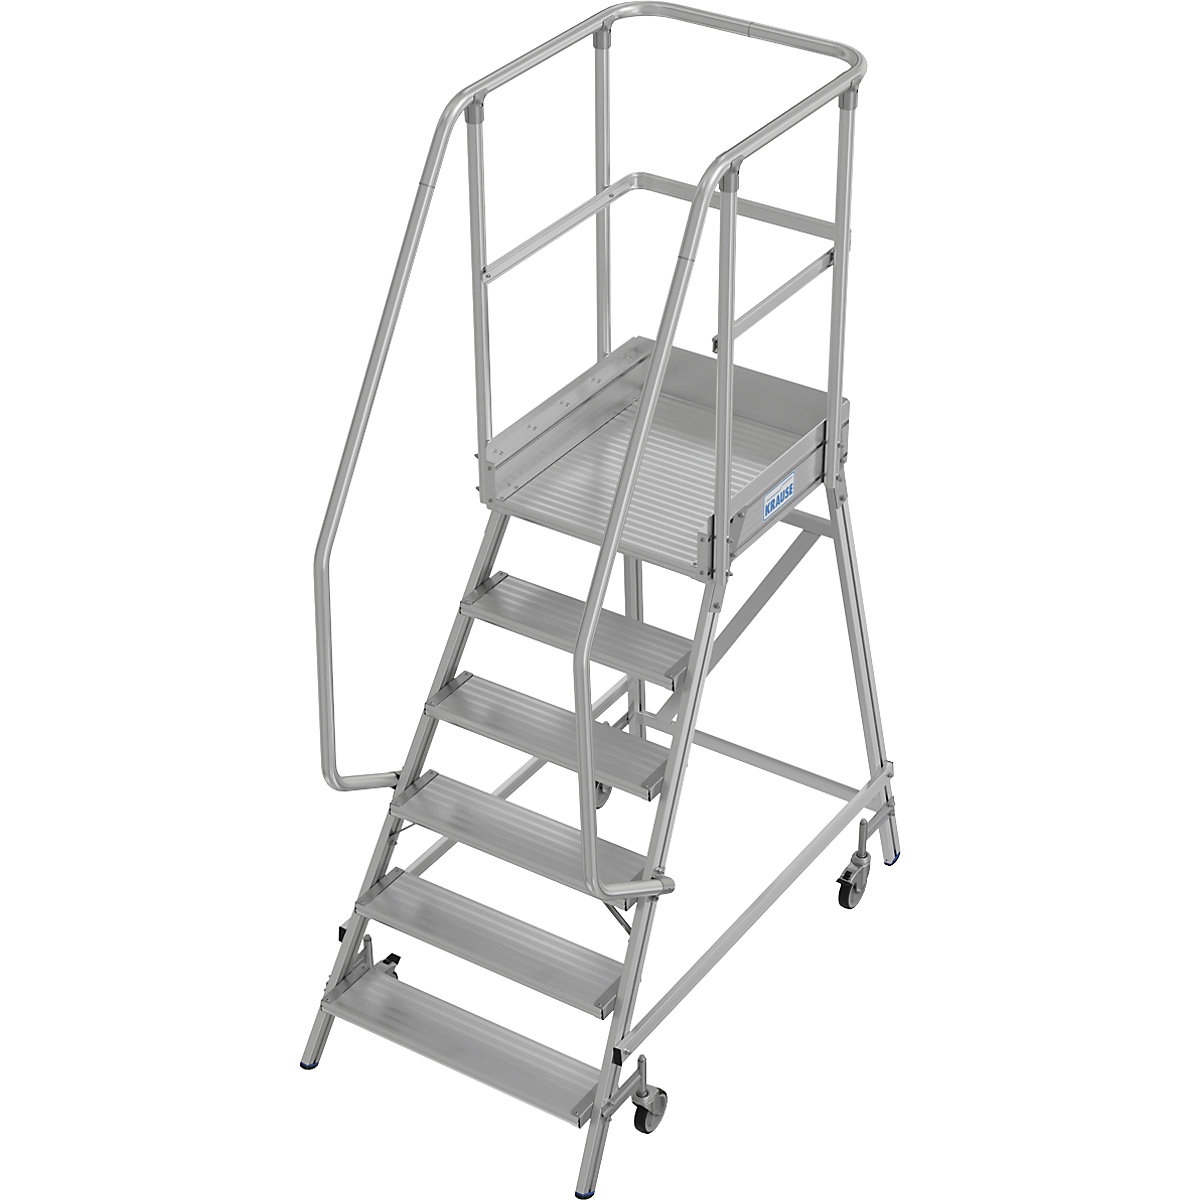 Mobile safety steps – KRAUSE, single sided access, foot rail, 6 steps-12